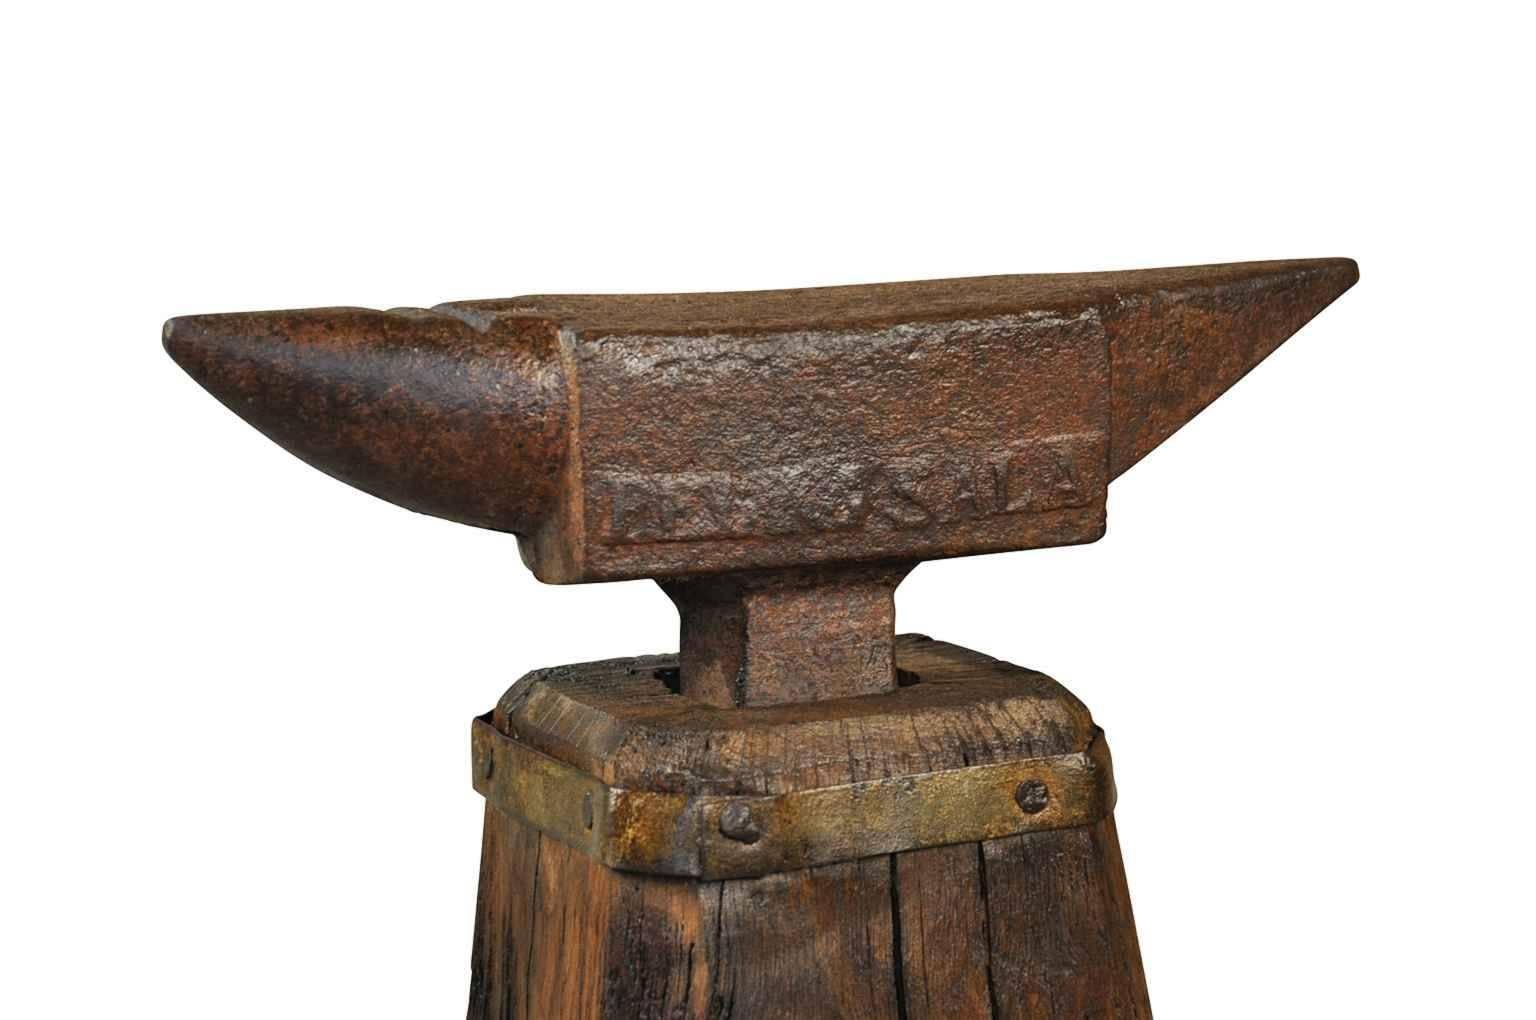 Iron 19th Century Enclume, Anvil on Its Wooden Base